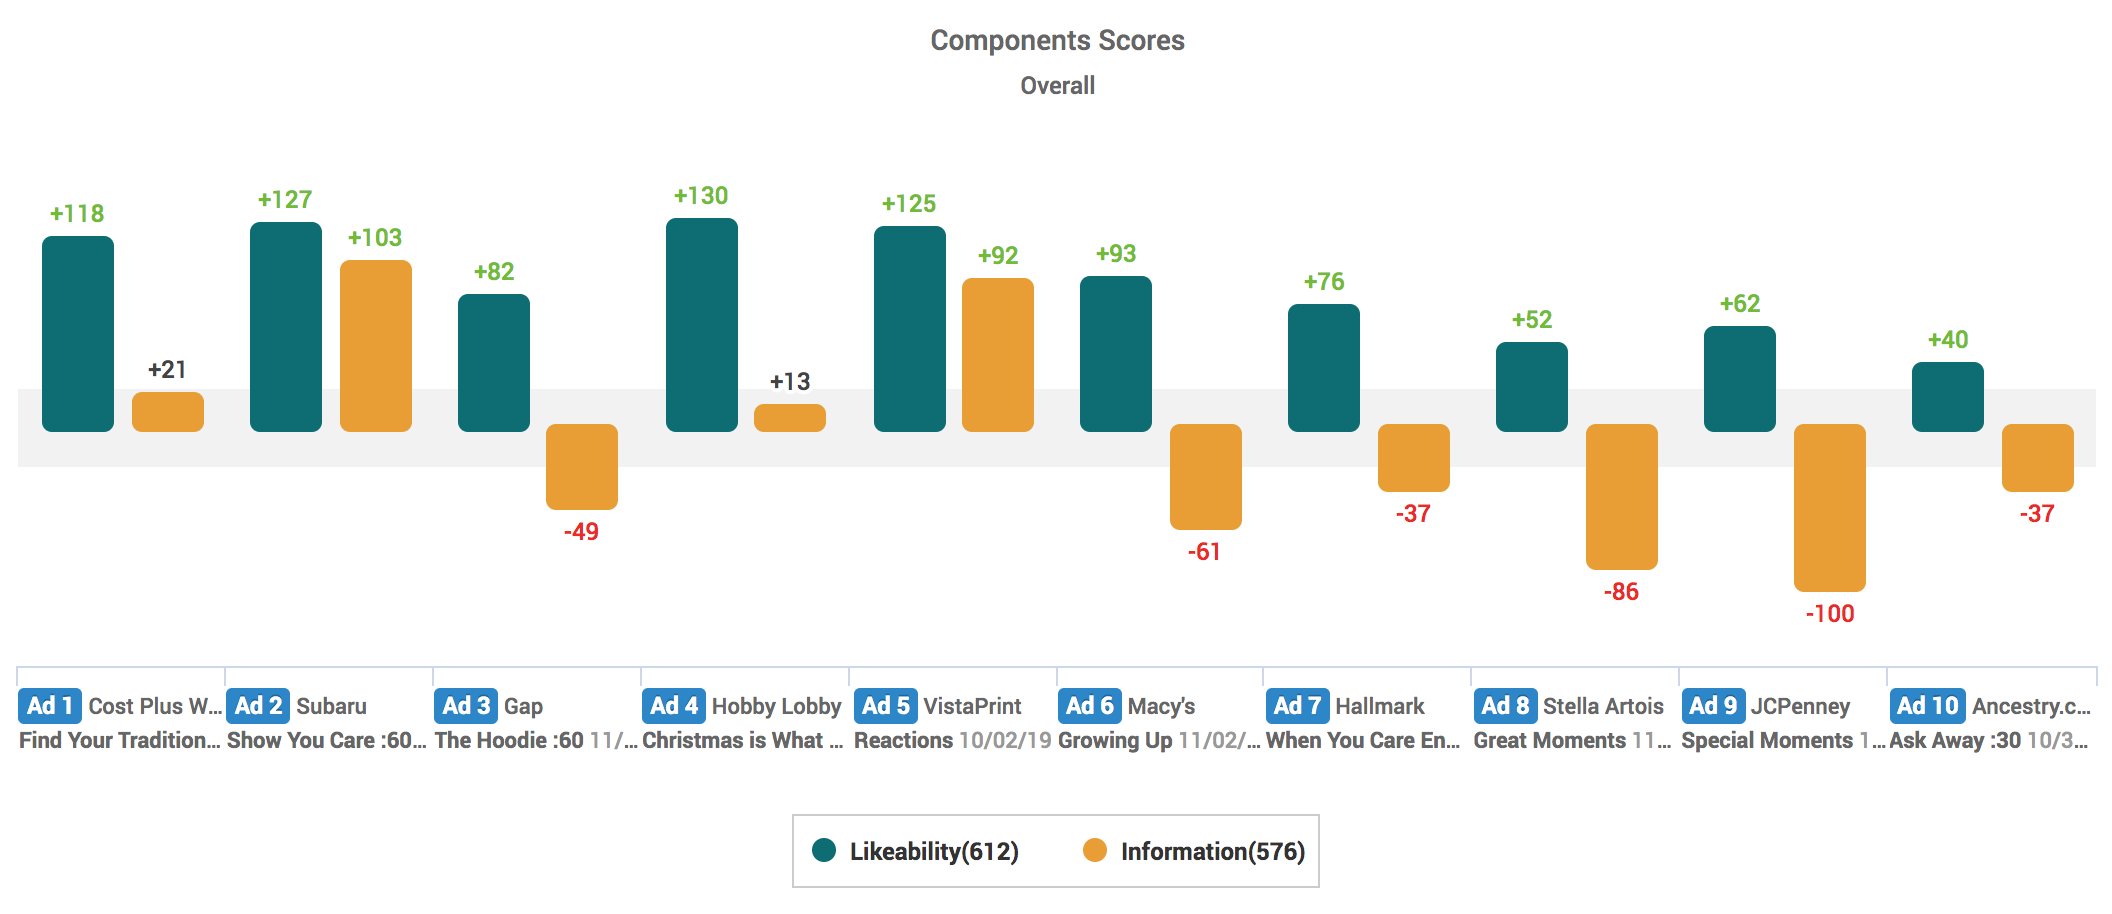 Likeability & Information Component Scores: Most Heartfelt Holiday Ads 2019